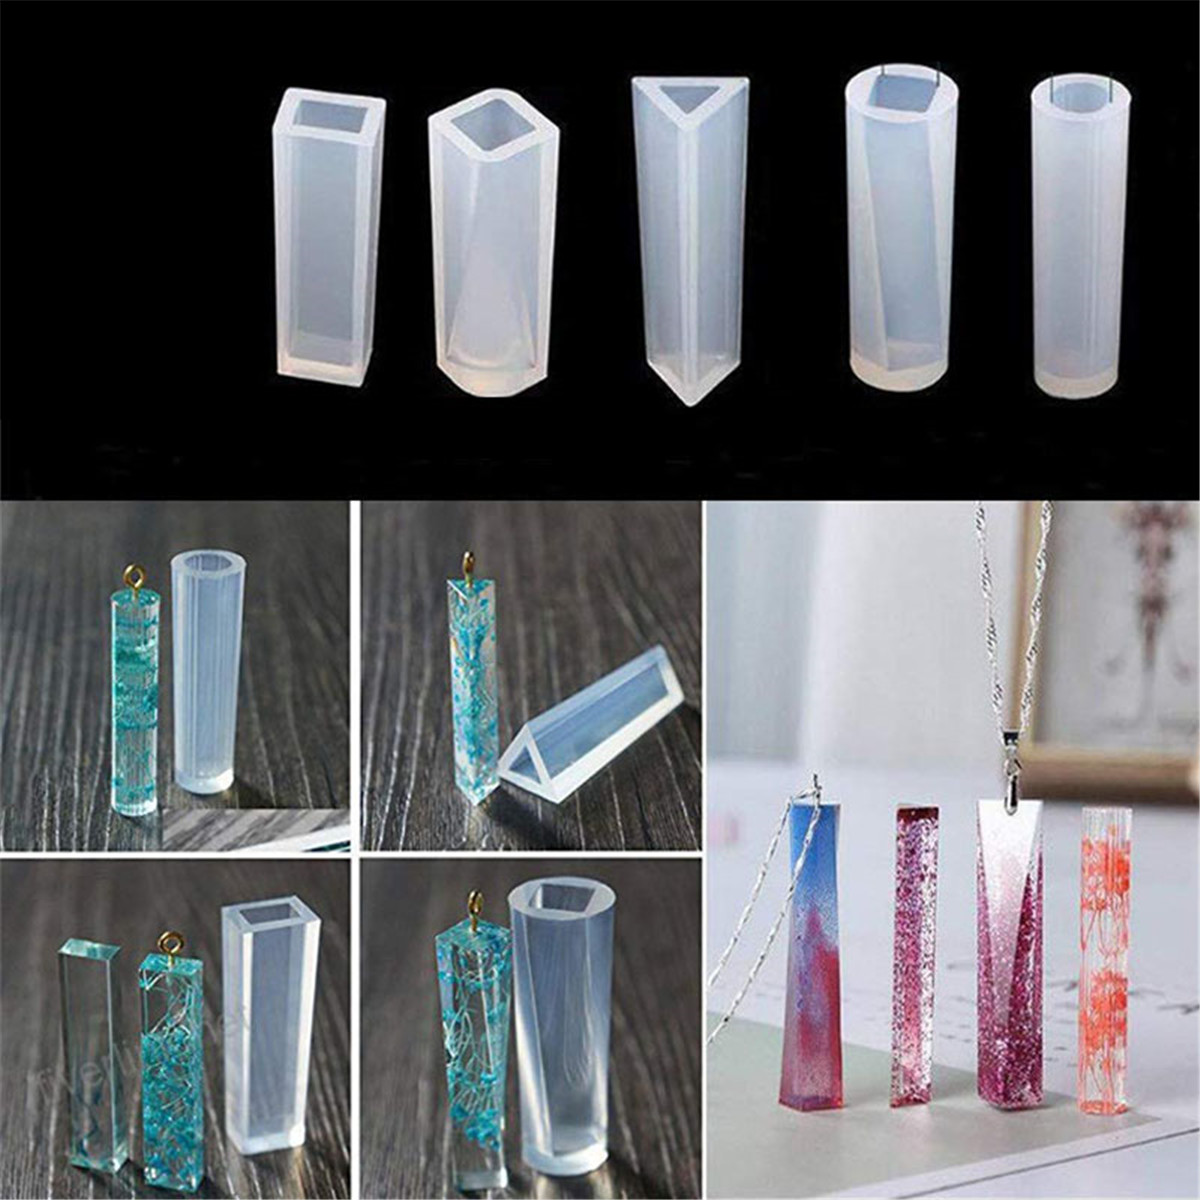 285Pcs-Resin-Casting-Molds-Kit-Silicone-Making-Jewelry-DIY-Pendant-Craft-Mould-Tools-Kit-1808480-5